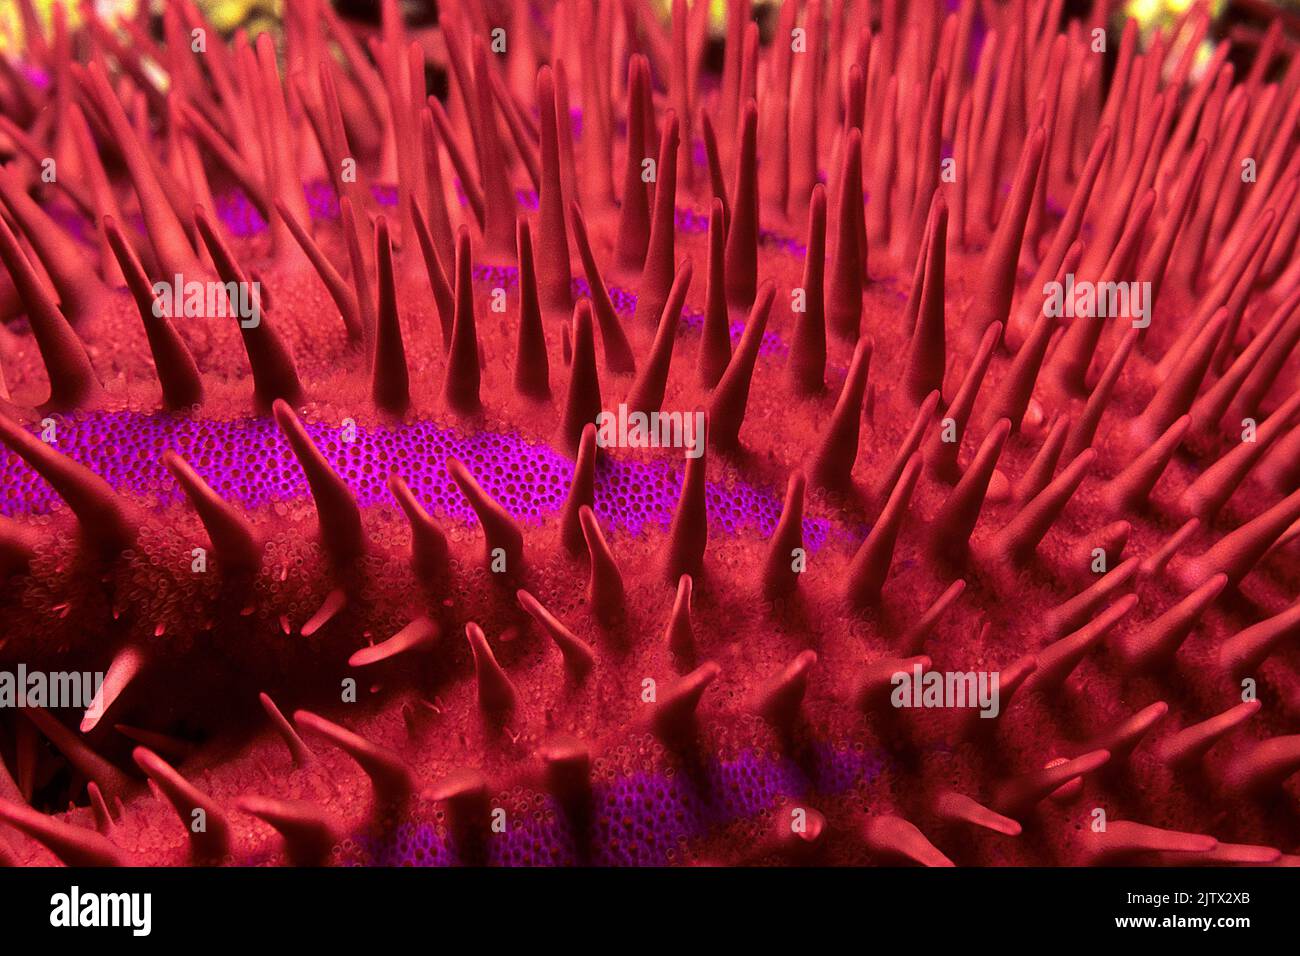 Spines of a Crown-of-Thorns Starfish (Acanthaster planci), the starfish is a coral reef predator, covered in very sharp and poisonous spines, Maldives Stock Photo